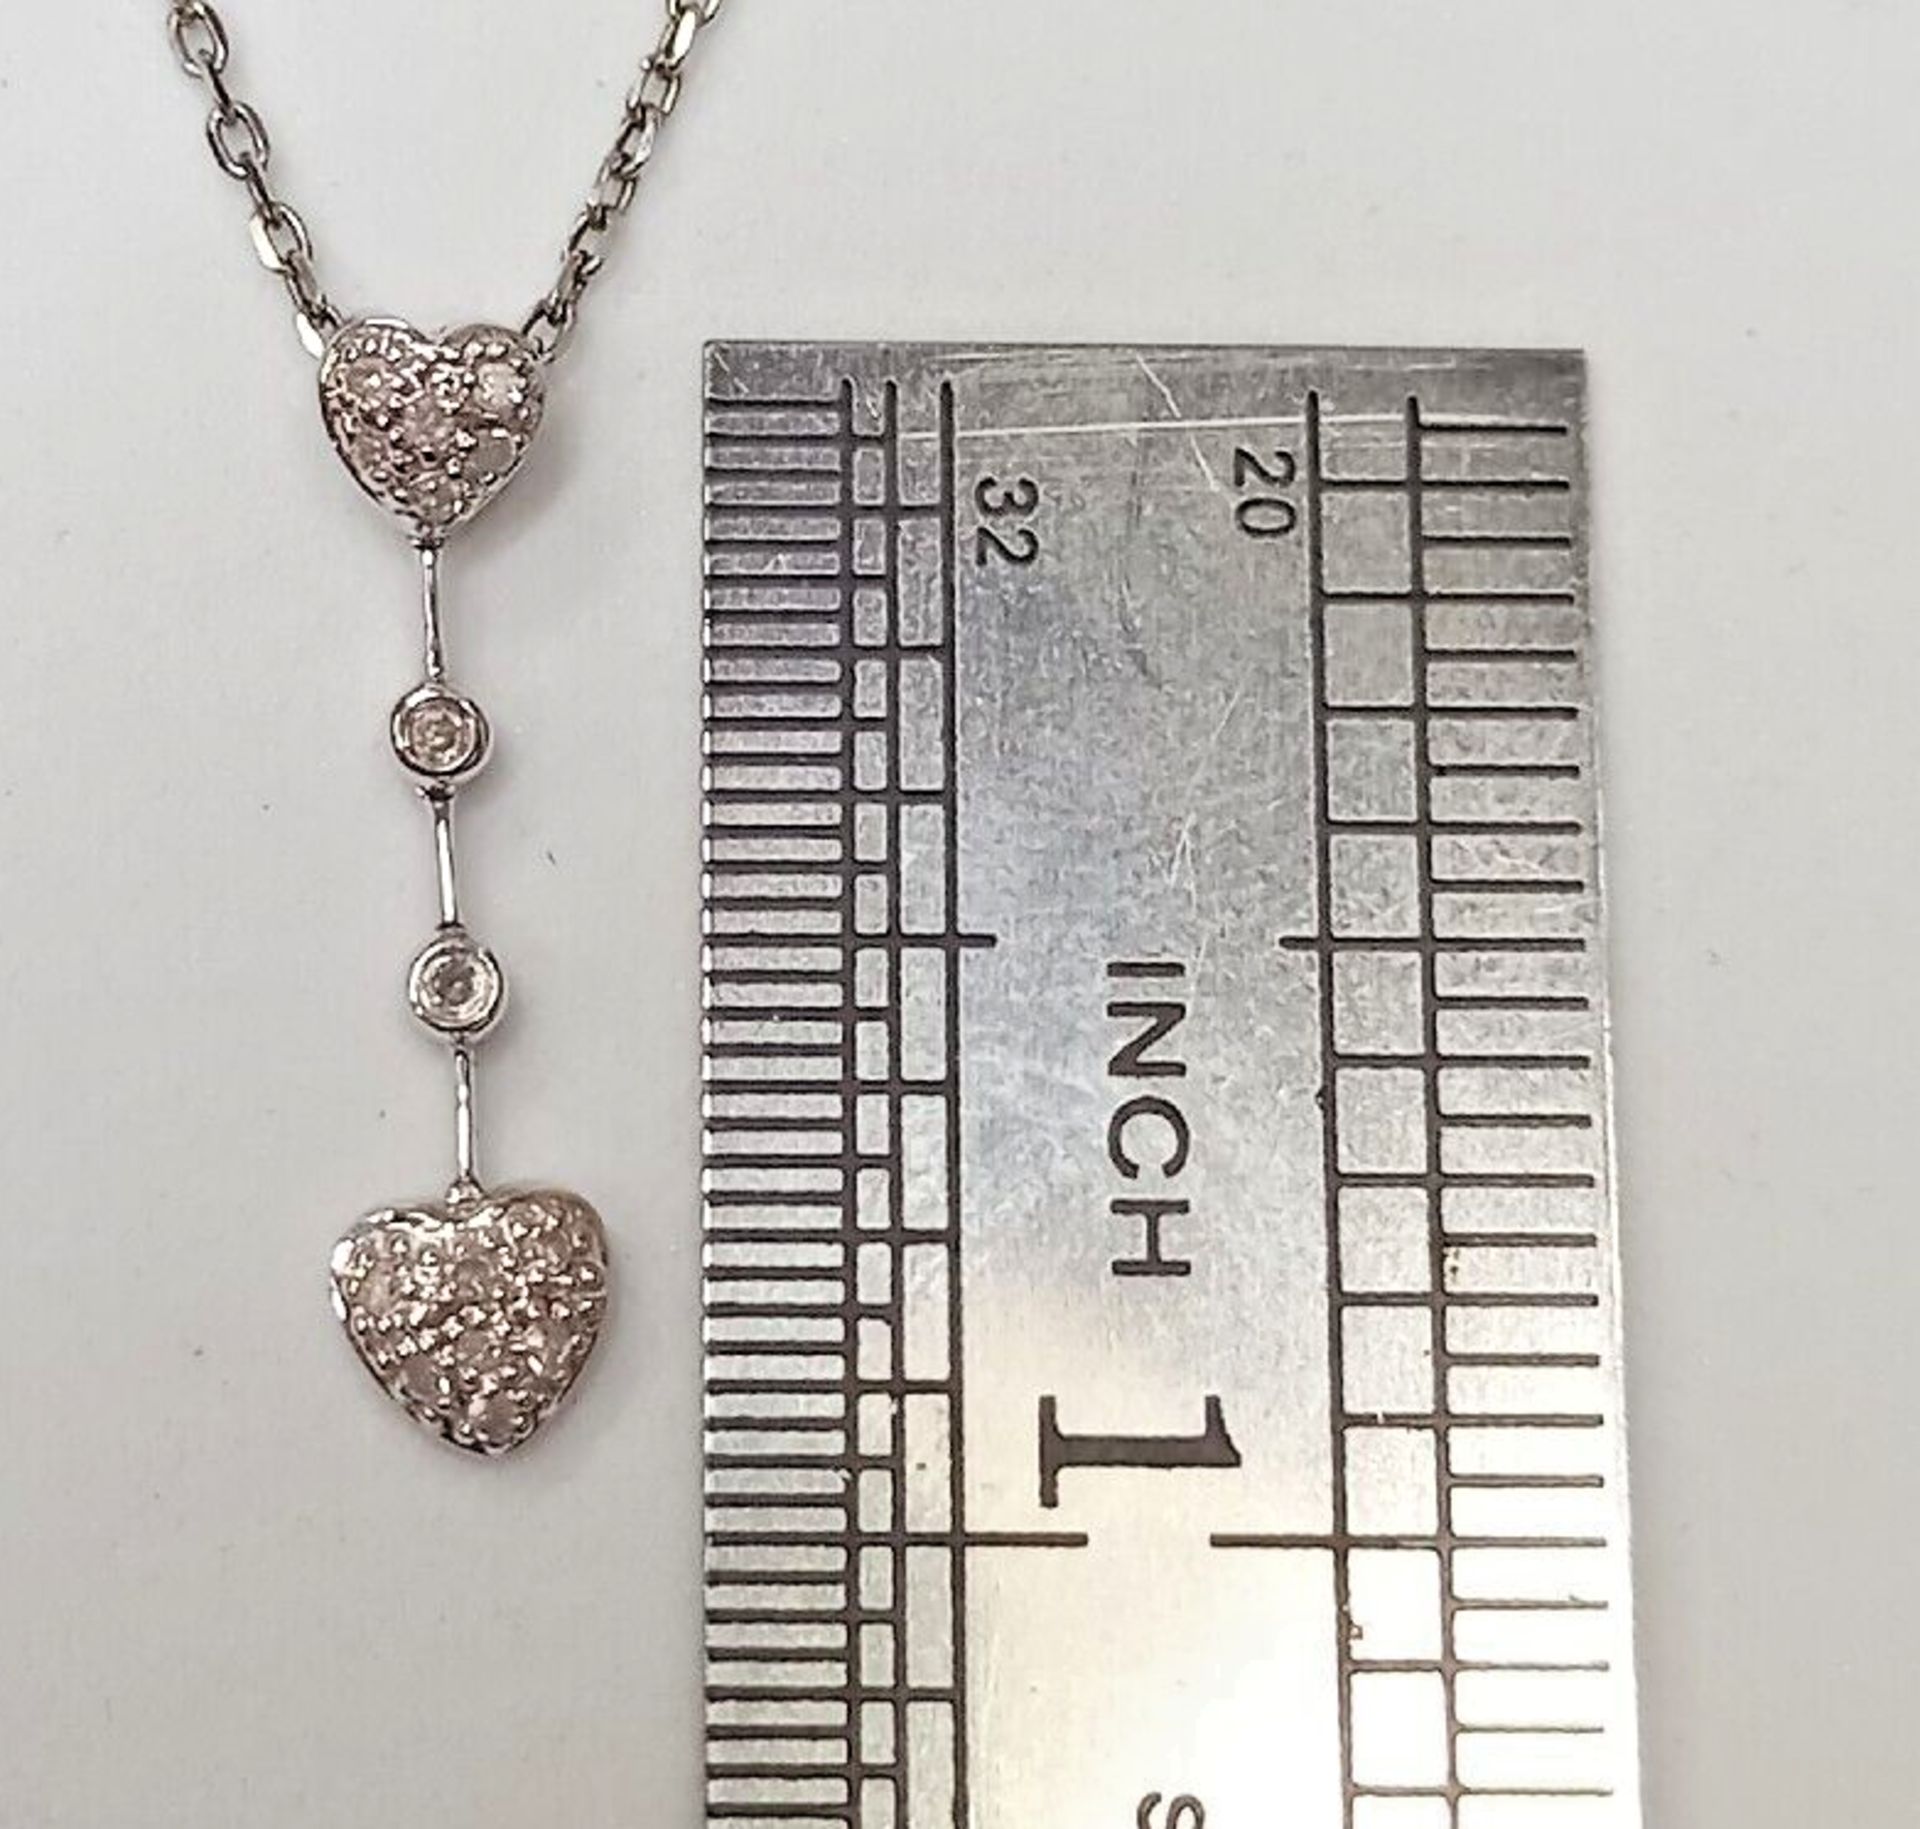 0.24CT DIAMOND HEART SHAPED PENDANT/9CT WHITE GOLD IN GIFT BOX WITH VALUATION CERTIFICATE OF £850 - Image 4 of 4